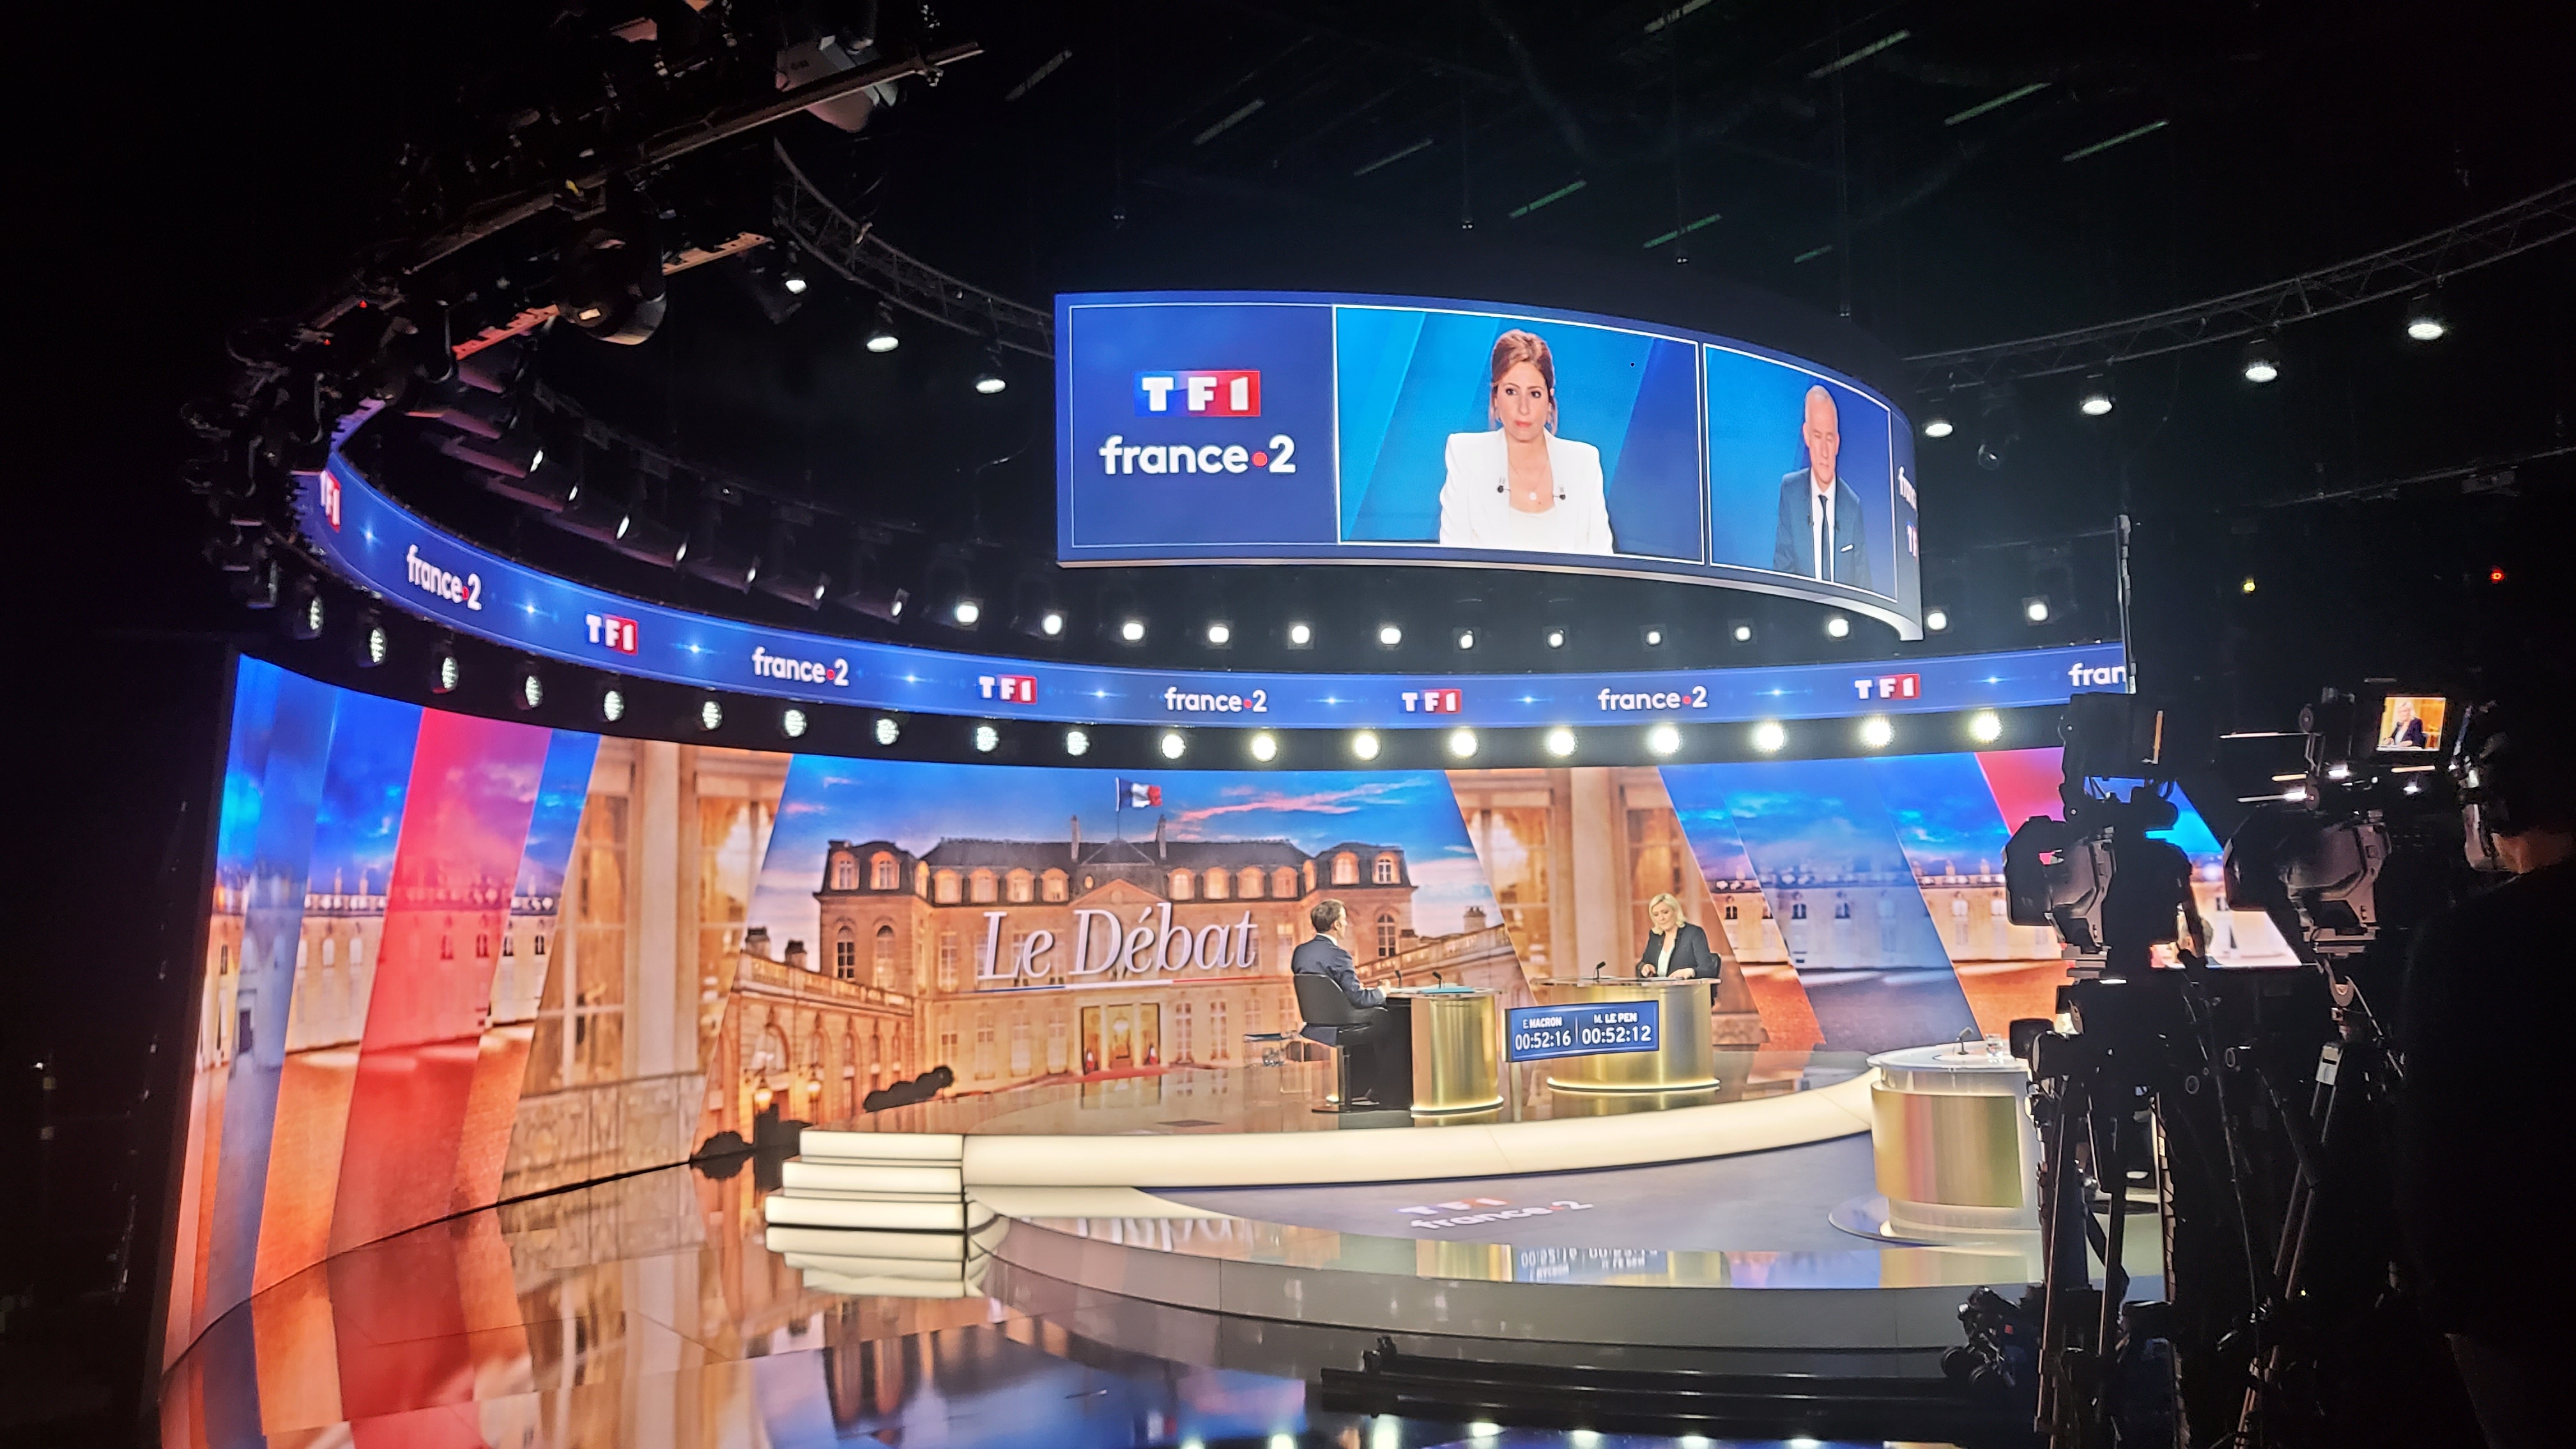 INFiLED provided screens for the scene of the French presidential debate